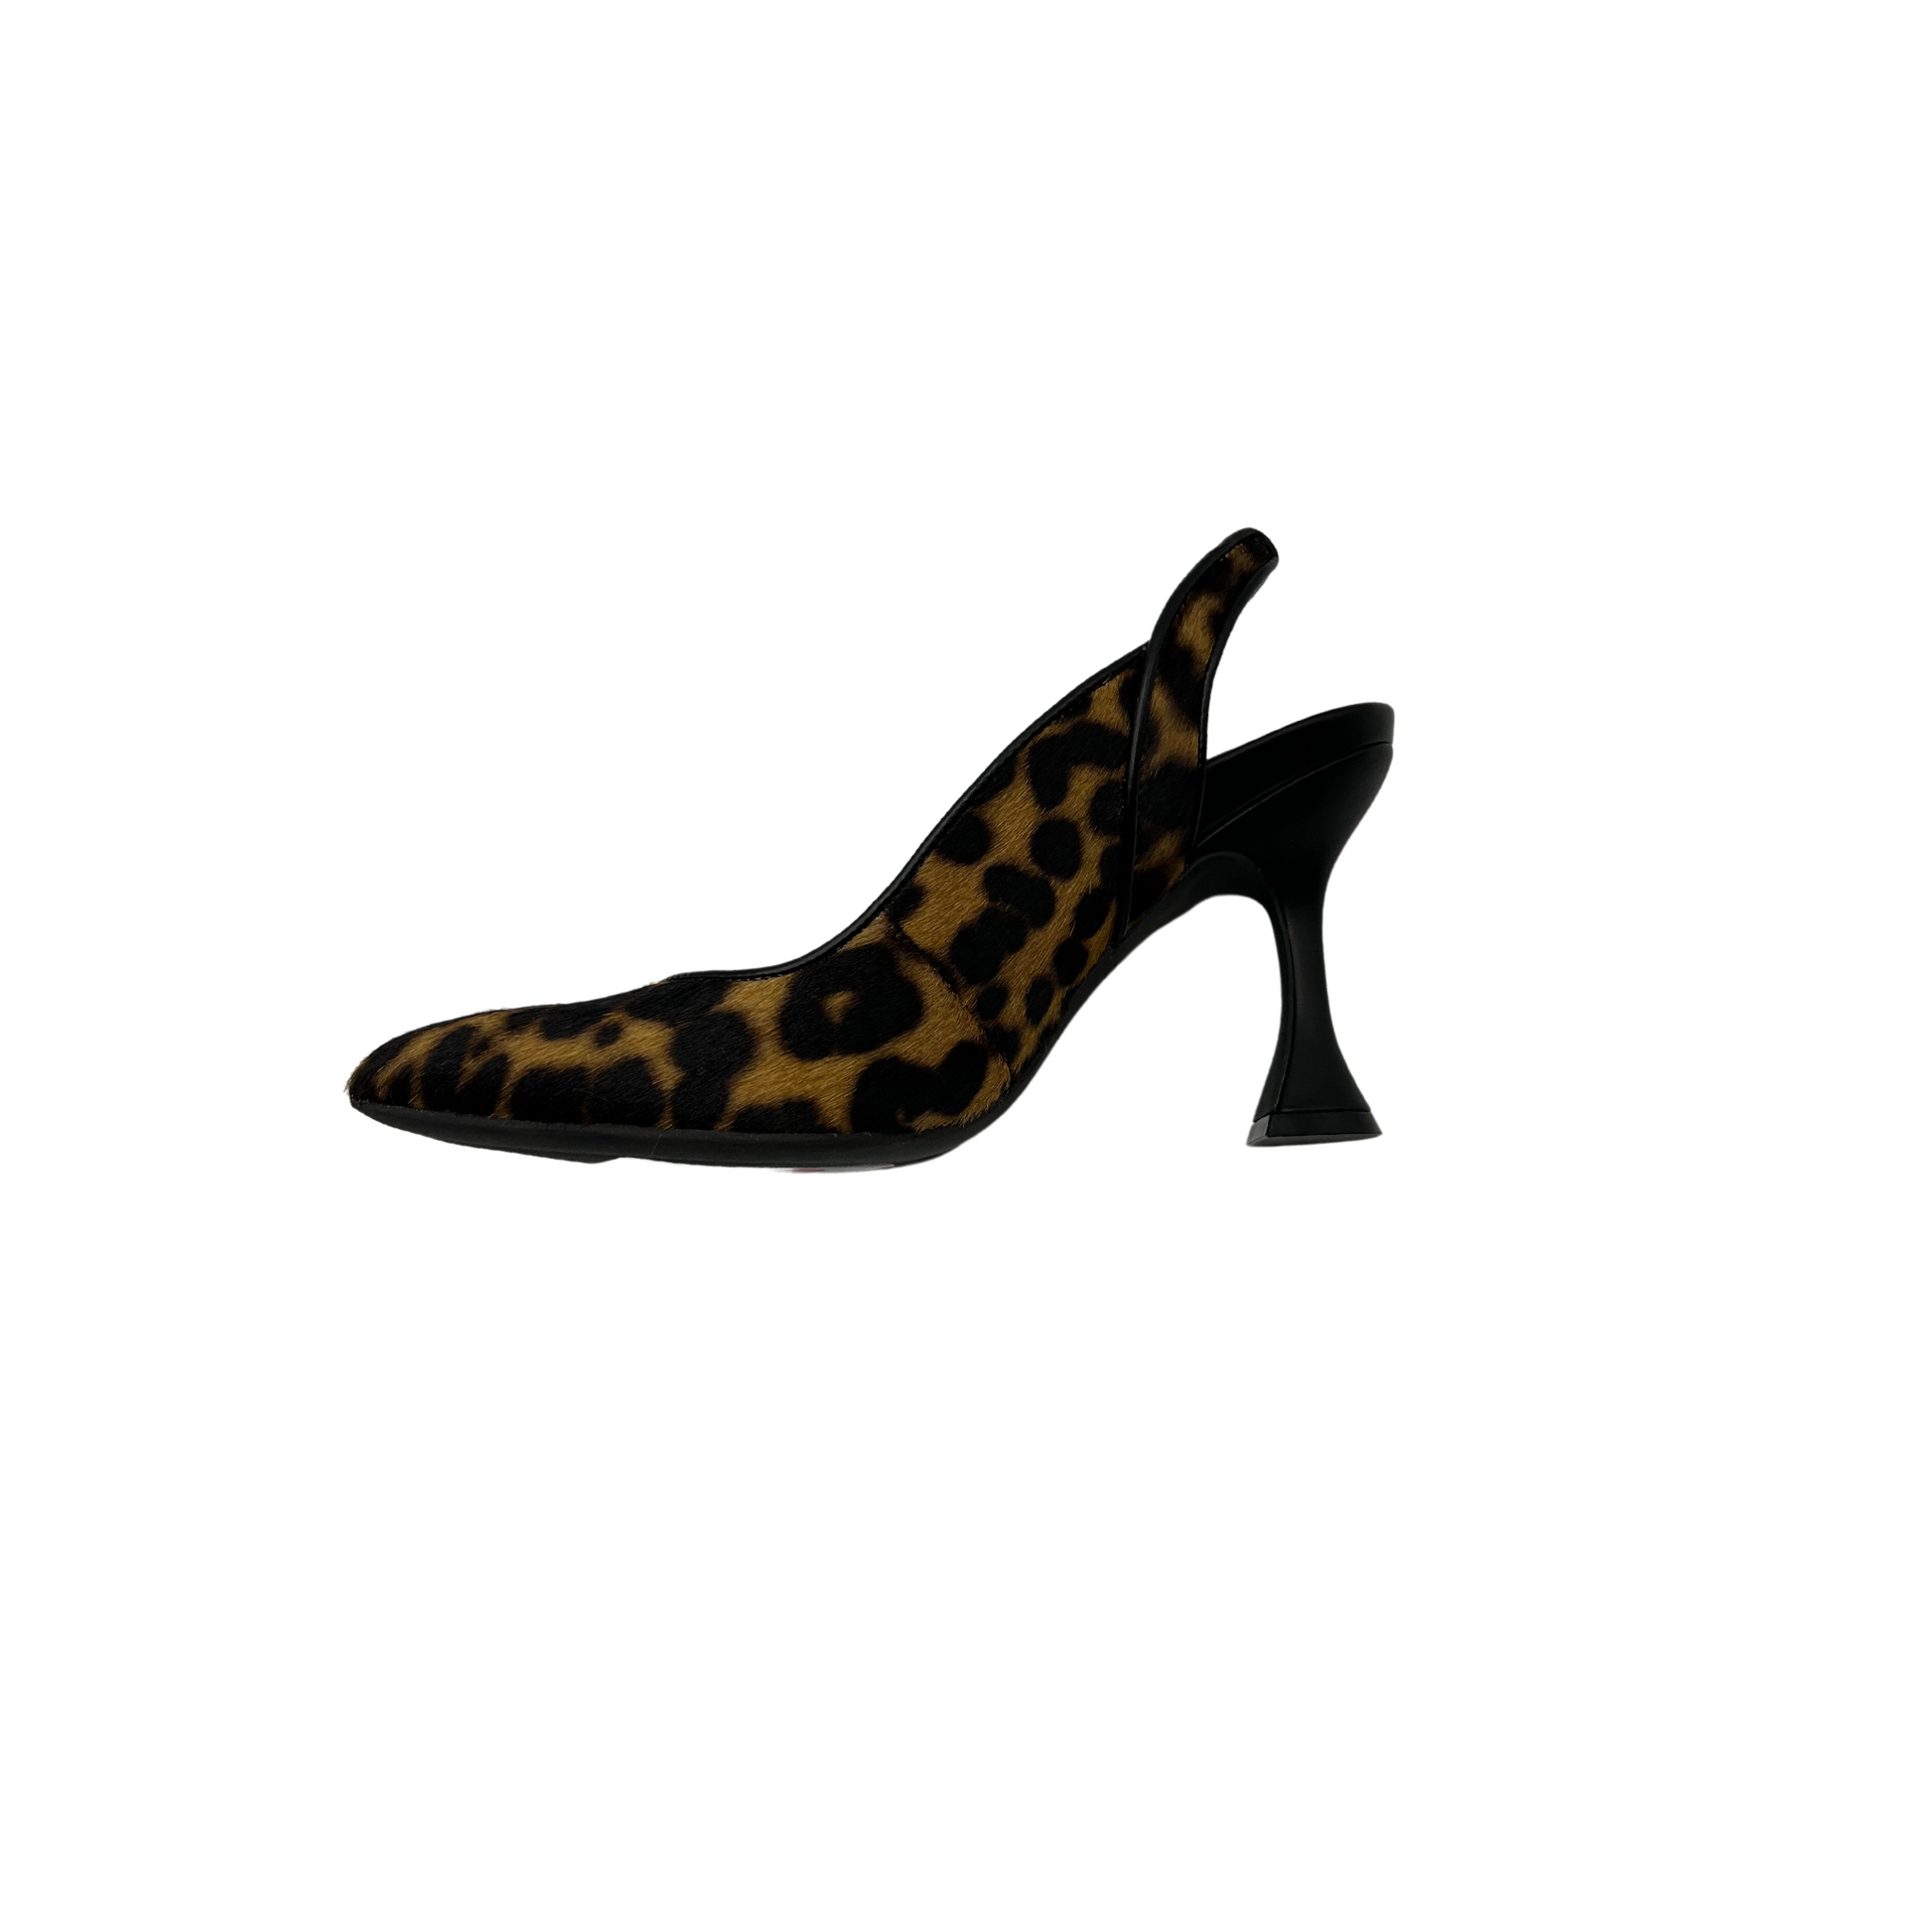 Inside view of slingback sandal with closed toe and hourglass heel.  Shown in a leopard print leather